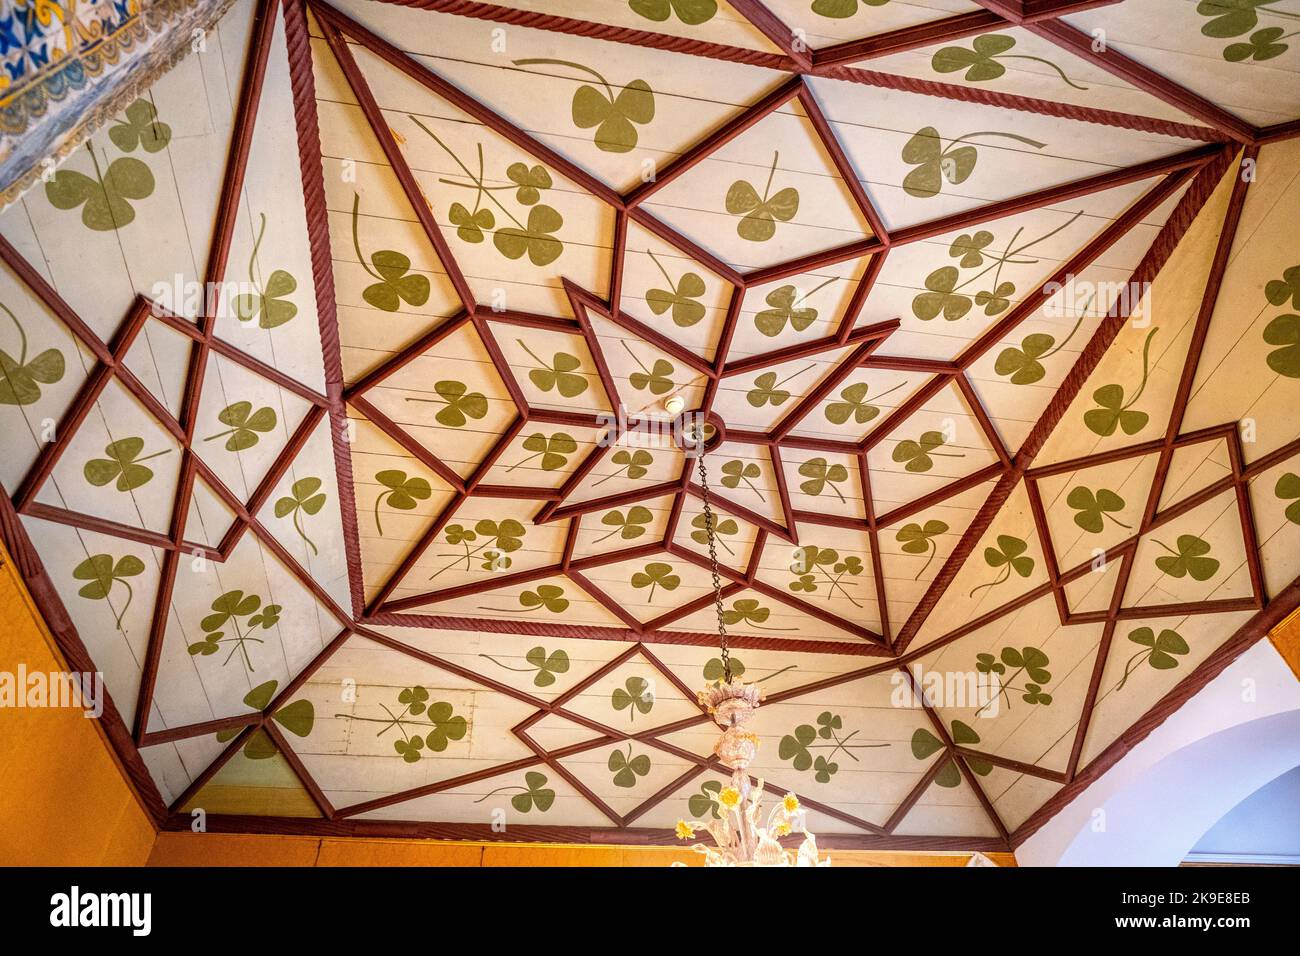 Shamrocks on the ceiling of a room at the Museu Condes de Castro Guimarães in Cascais, Portugal.  The family had partly Irish ancestry. Stock Photo